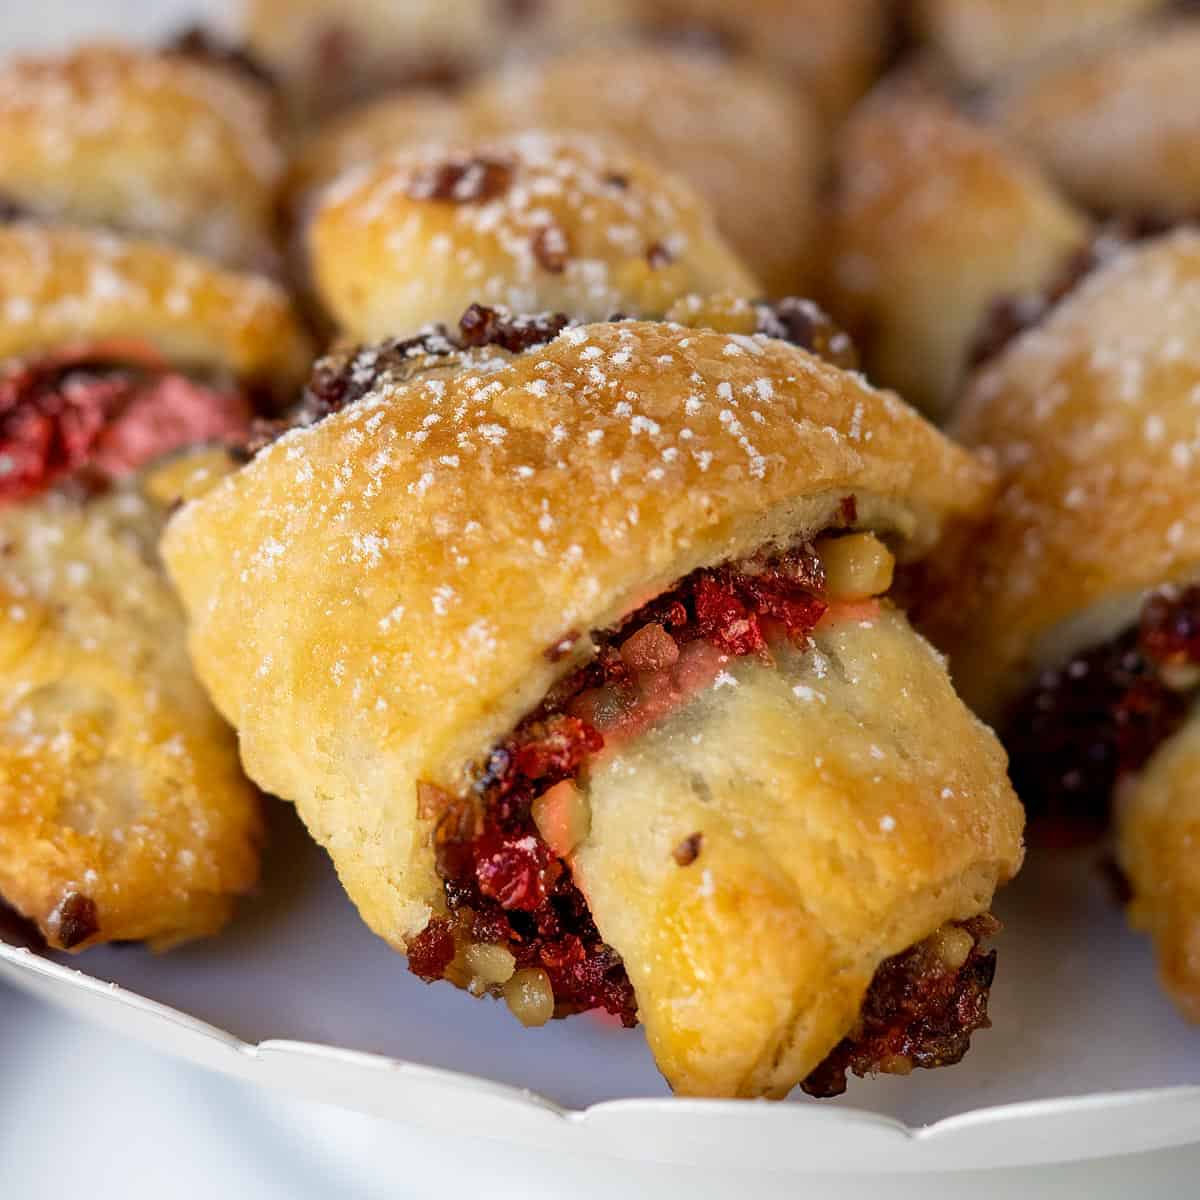 Close-up of a baked cranberry orange and walnut rugelach.